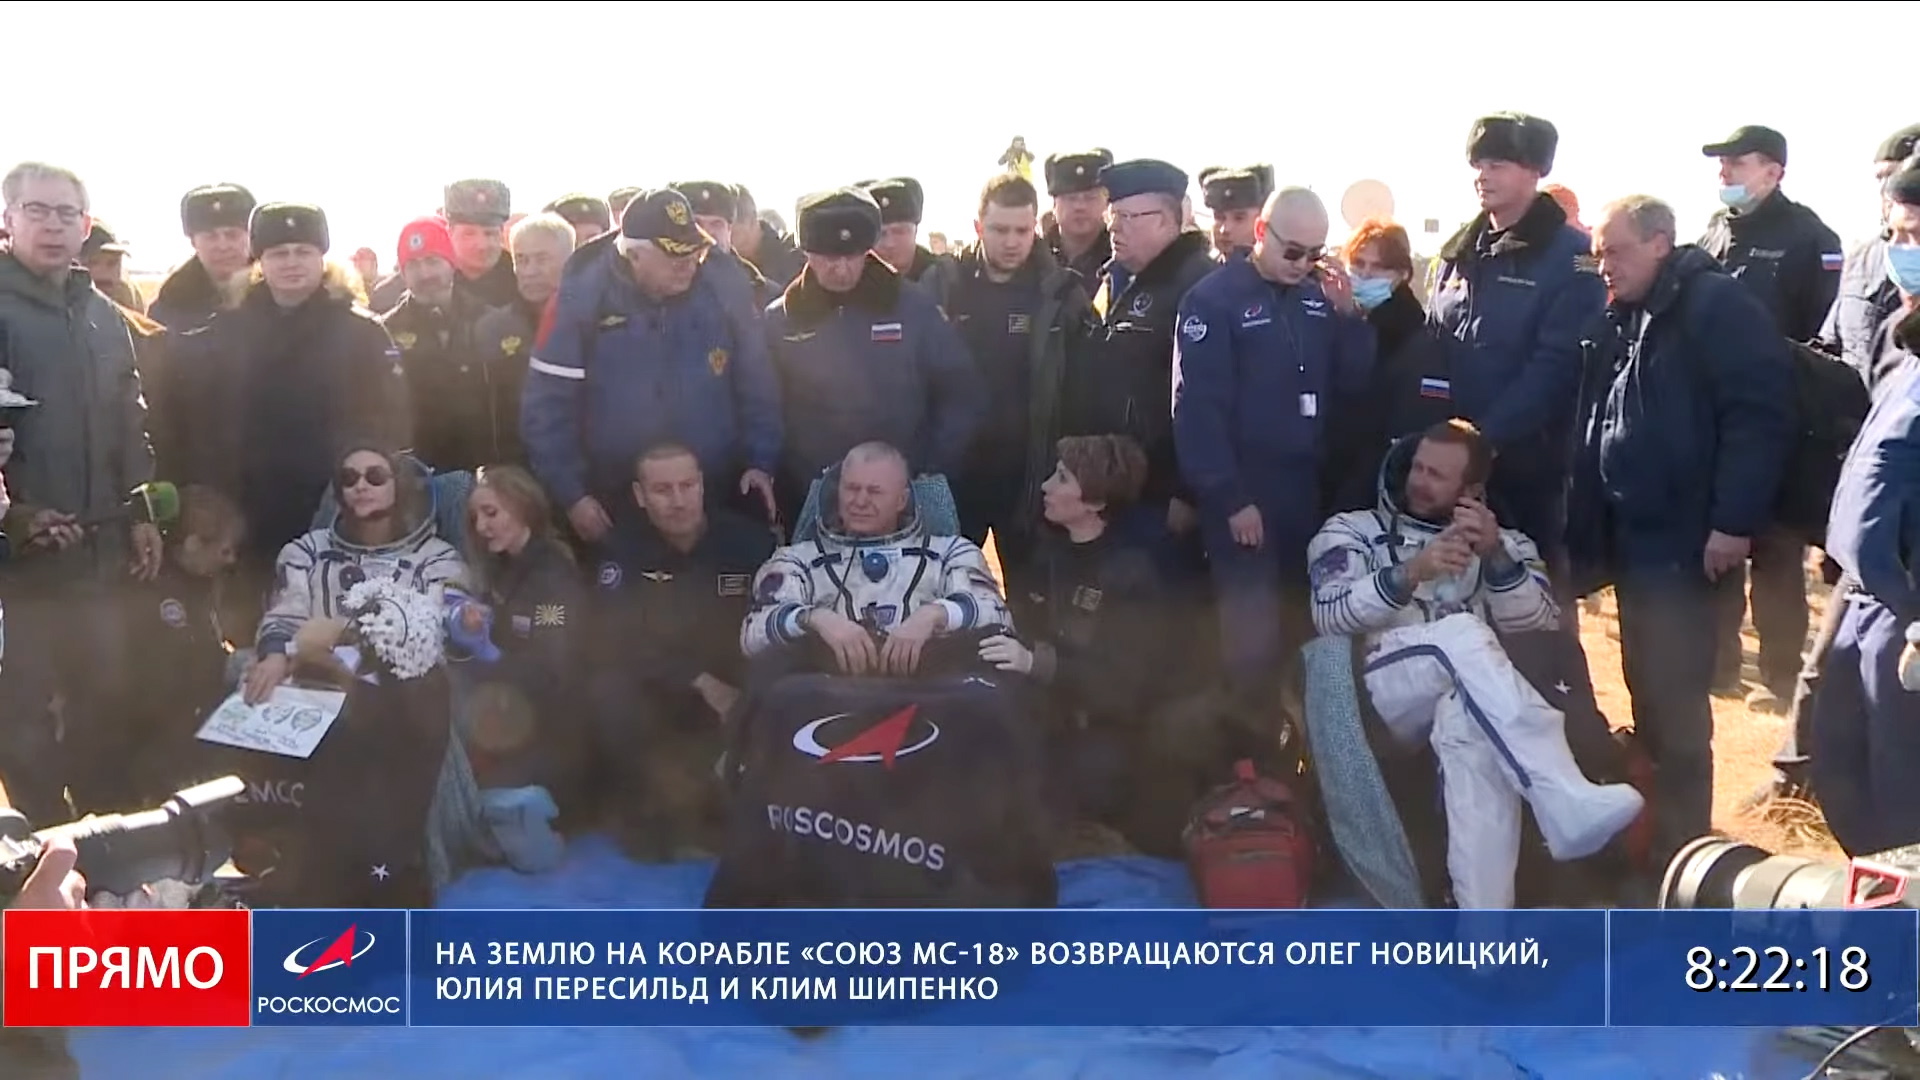 epa09528130 A handout photo taken from video footage made available by Roscosmos press service shows (L-R) Russian actress Yulia Peresild, cosmonaut Oleg Novitsky and film director Klim Shipenko after the landing of the Russian Soyuz MS-18 space capsule in a remote area southeast of Zhezkazgan in the Karaganda region of Kazakhstan, 17 October 2021. A Soyuz space capsule with Russian crew member, cosmonaut Oleg Novitsky, actress Yulia Peresild and film director Klim Shipenko, returning from a twelve day mission to make the first a feature film in orbit at the International Space Station, landed safely in the steppes of Kazakhstan.  EPA/ROSCOSMOS PRESS SERVICE / HANDOU  HANDOUT EDITORIAL USE ONLY/NO SALES